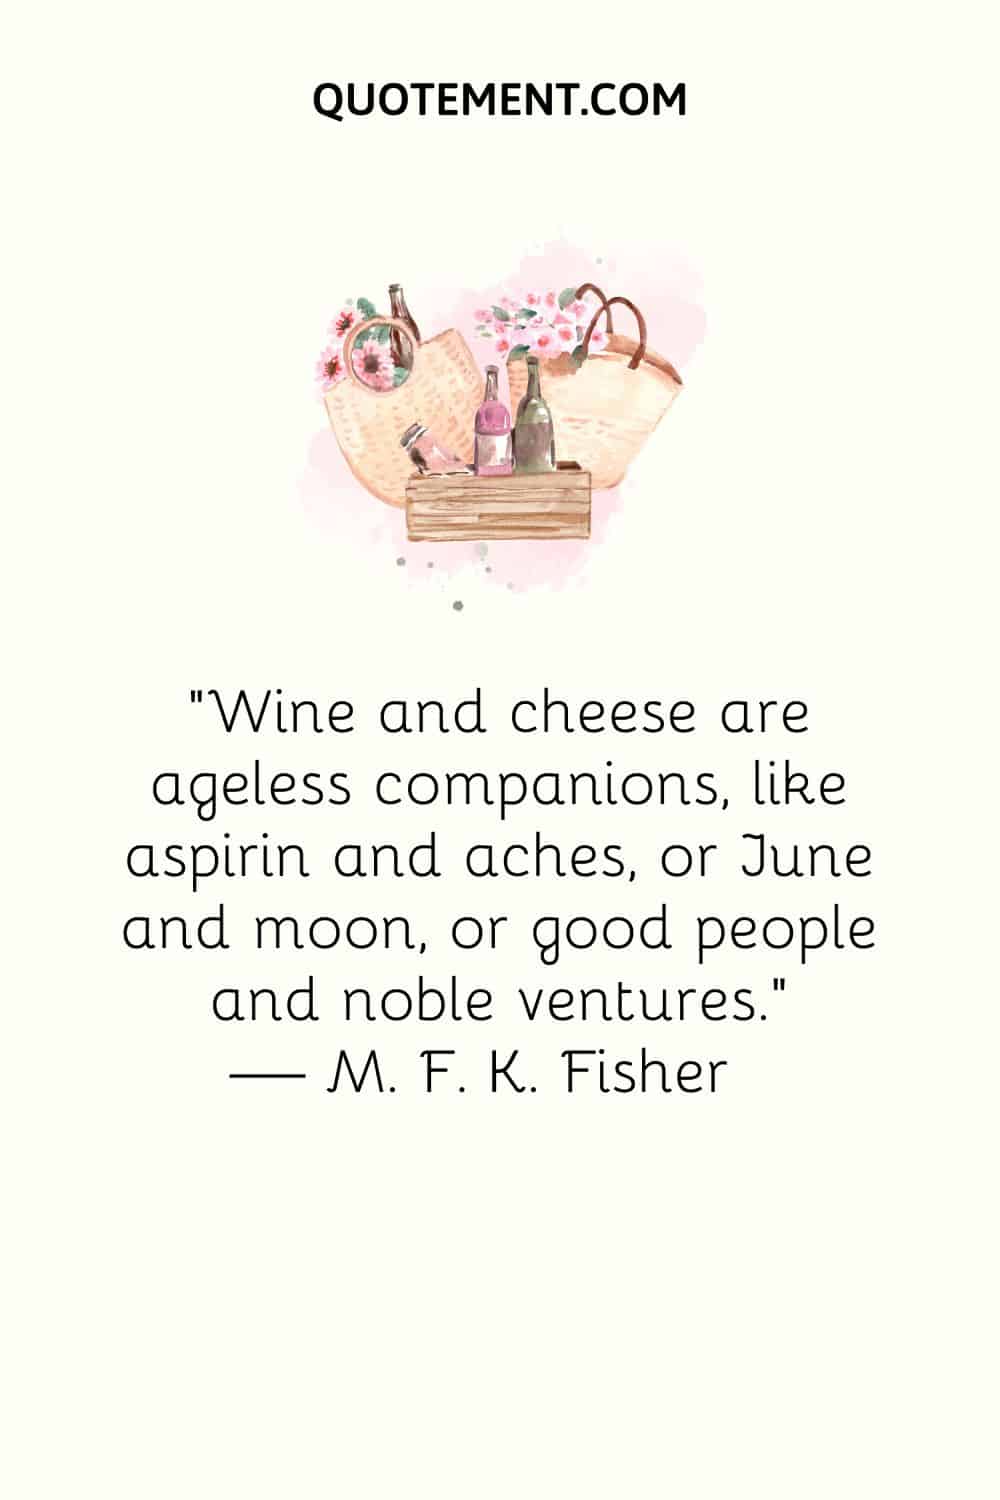 “Wine and cheese are ageless companions, like aspirin and aches, or June and moon, or good people and noble ventures.” — M. F. K. Fisher